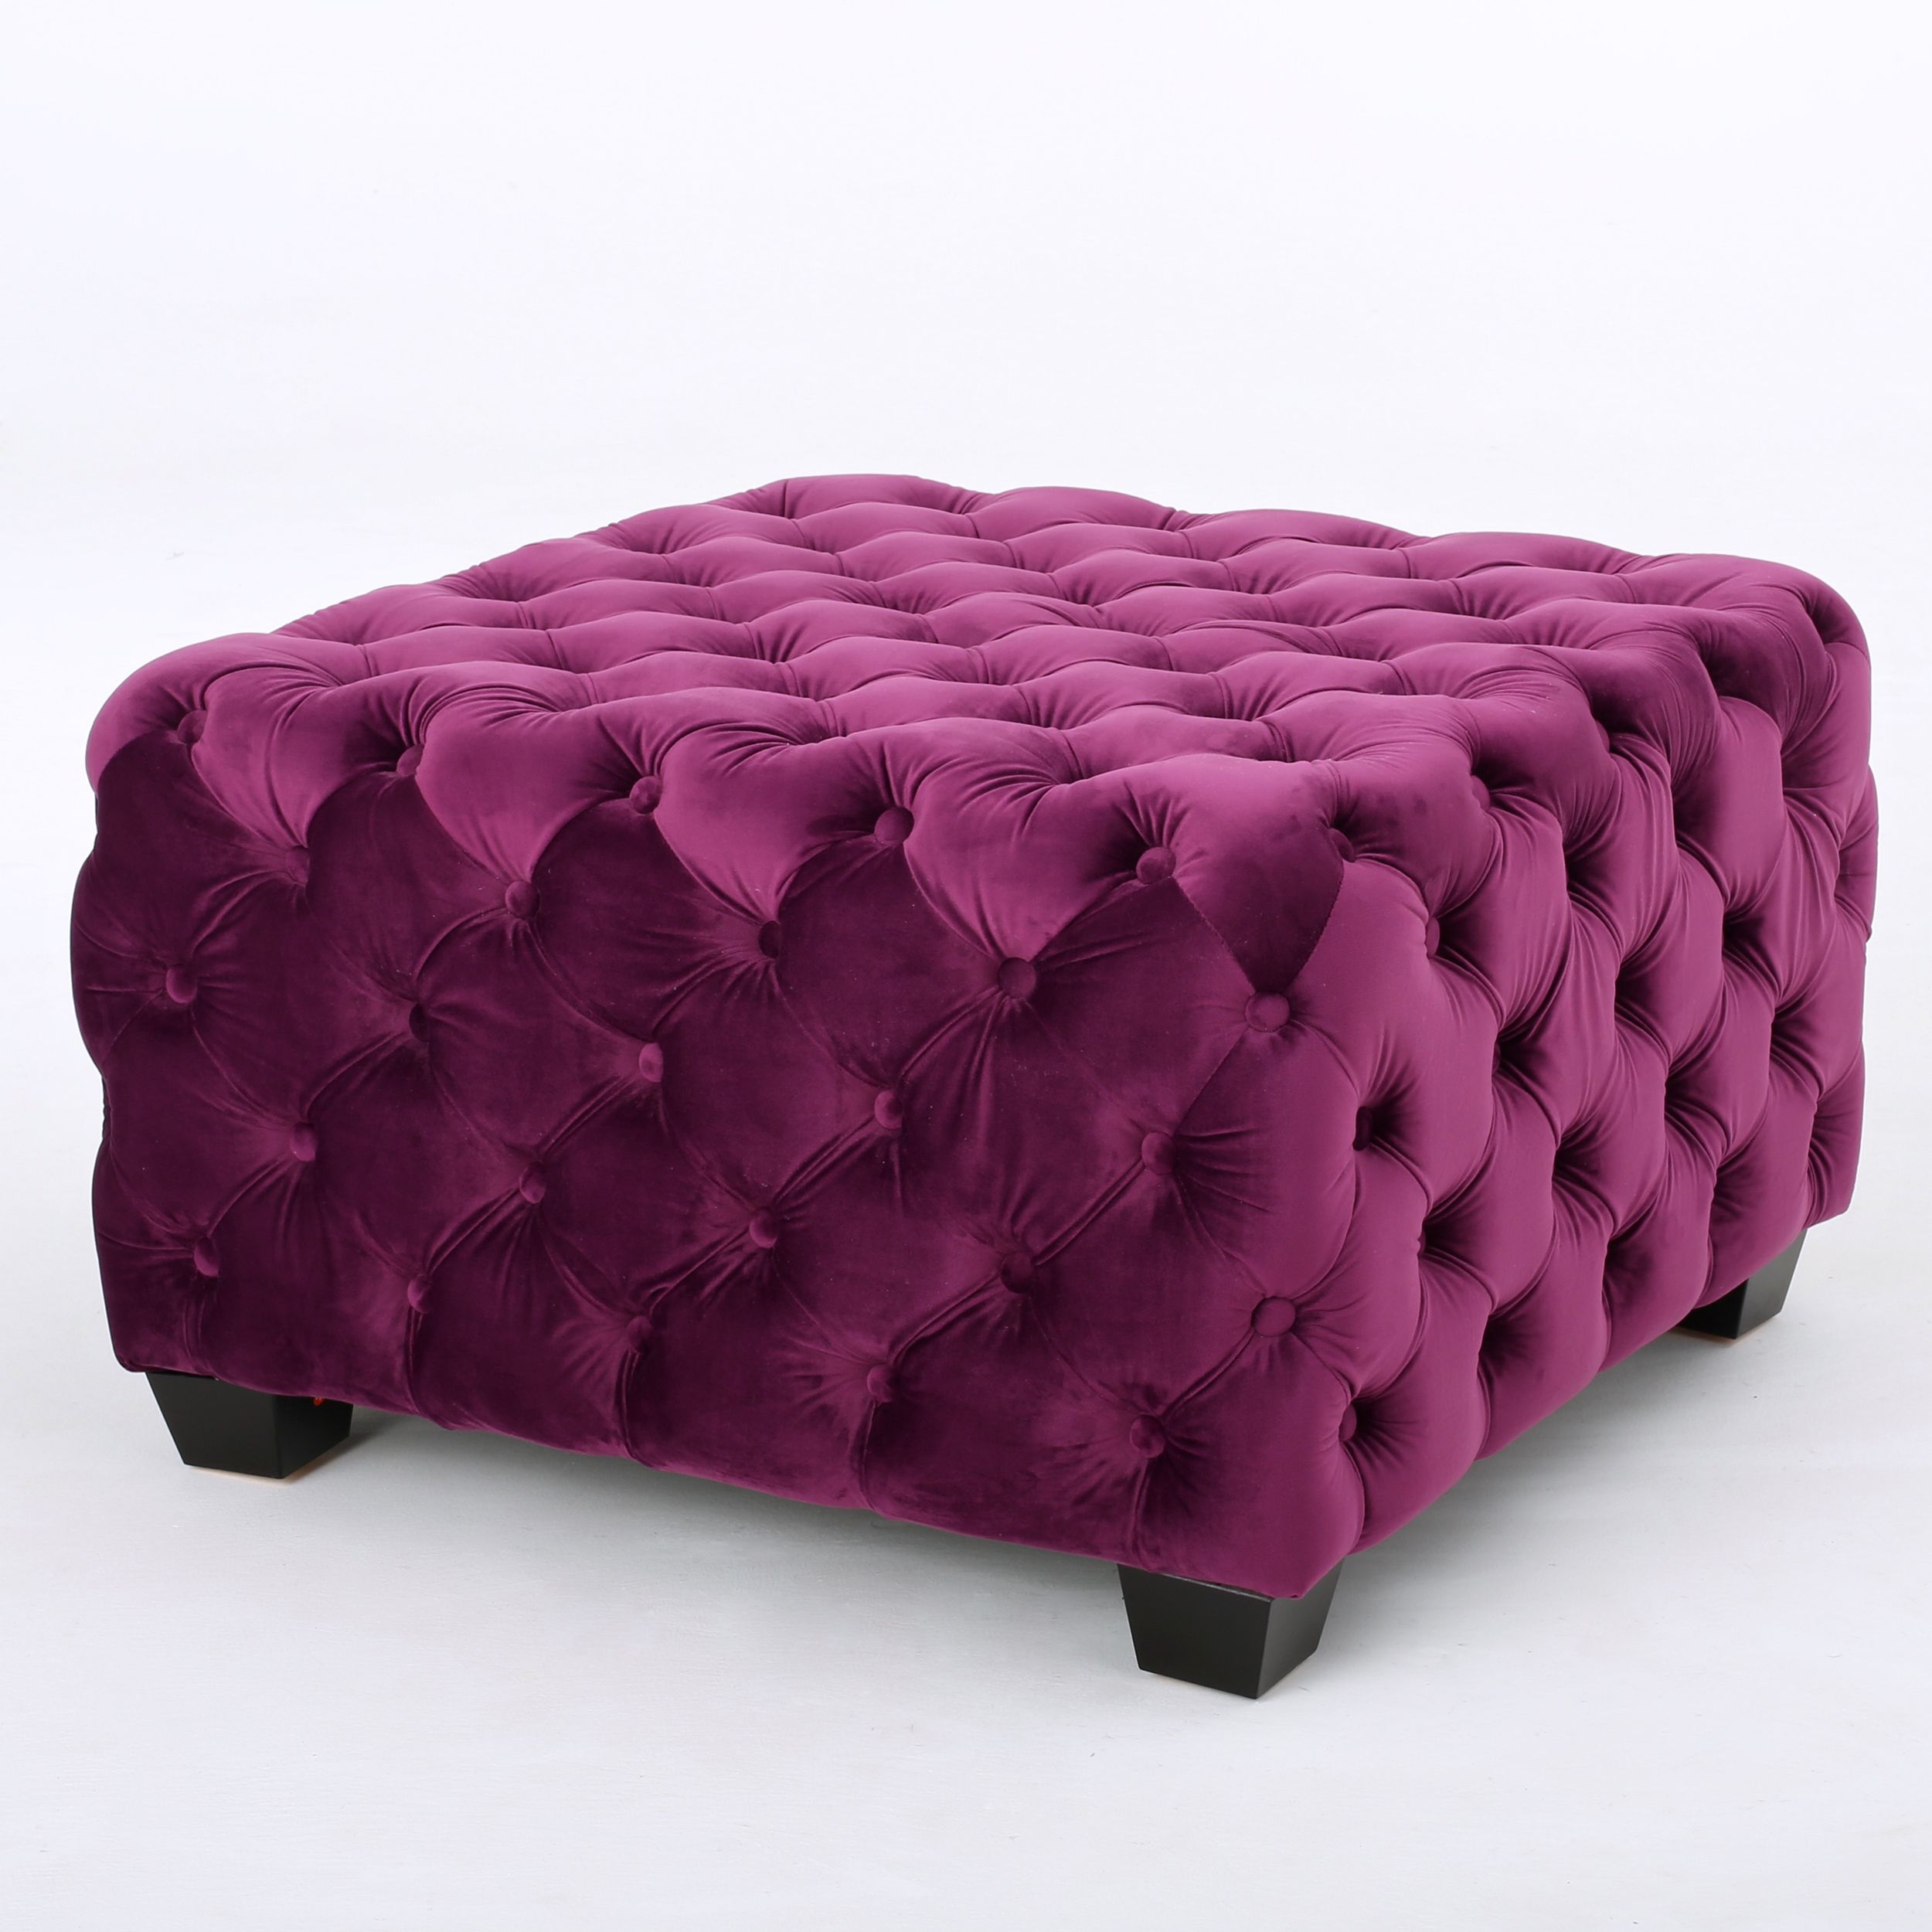 Provence Tufted Velvet Fabric Square Ottoman Bench, Fuchsia – Walmart For Velvet Ribbed Fabric Round Storage Ottomans (View 12 of 20)